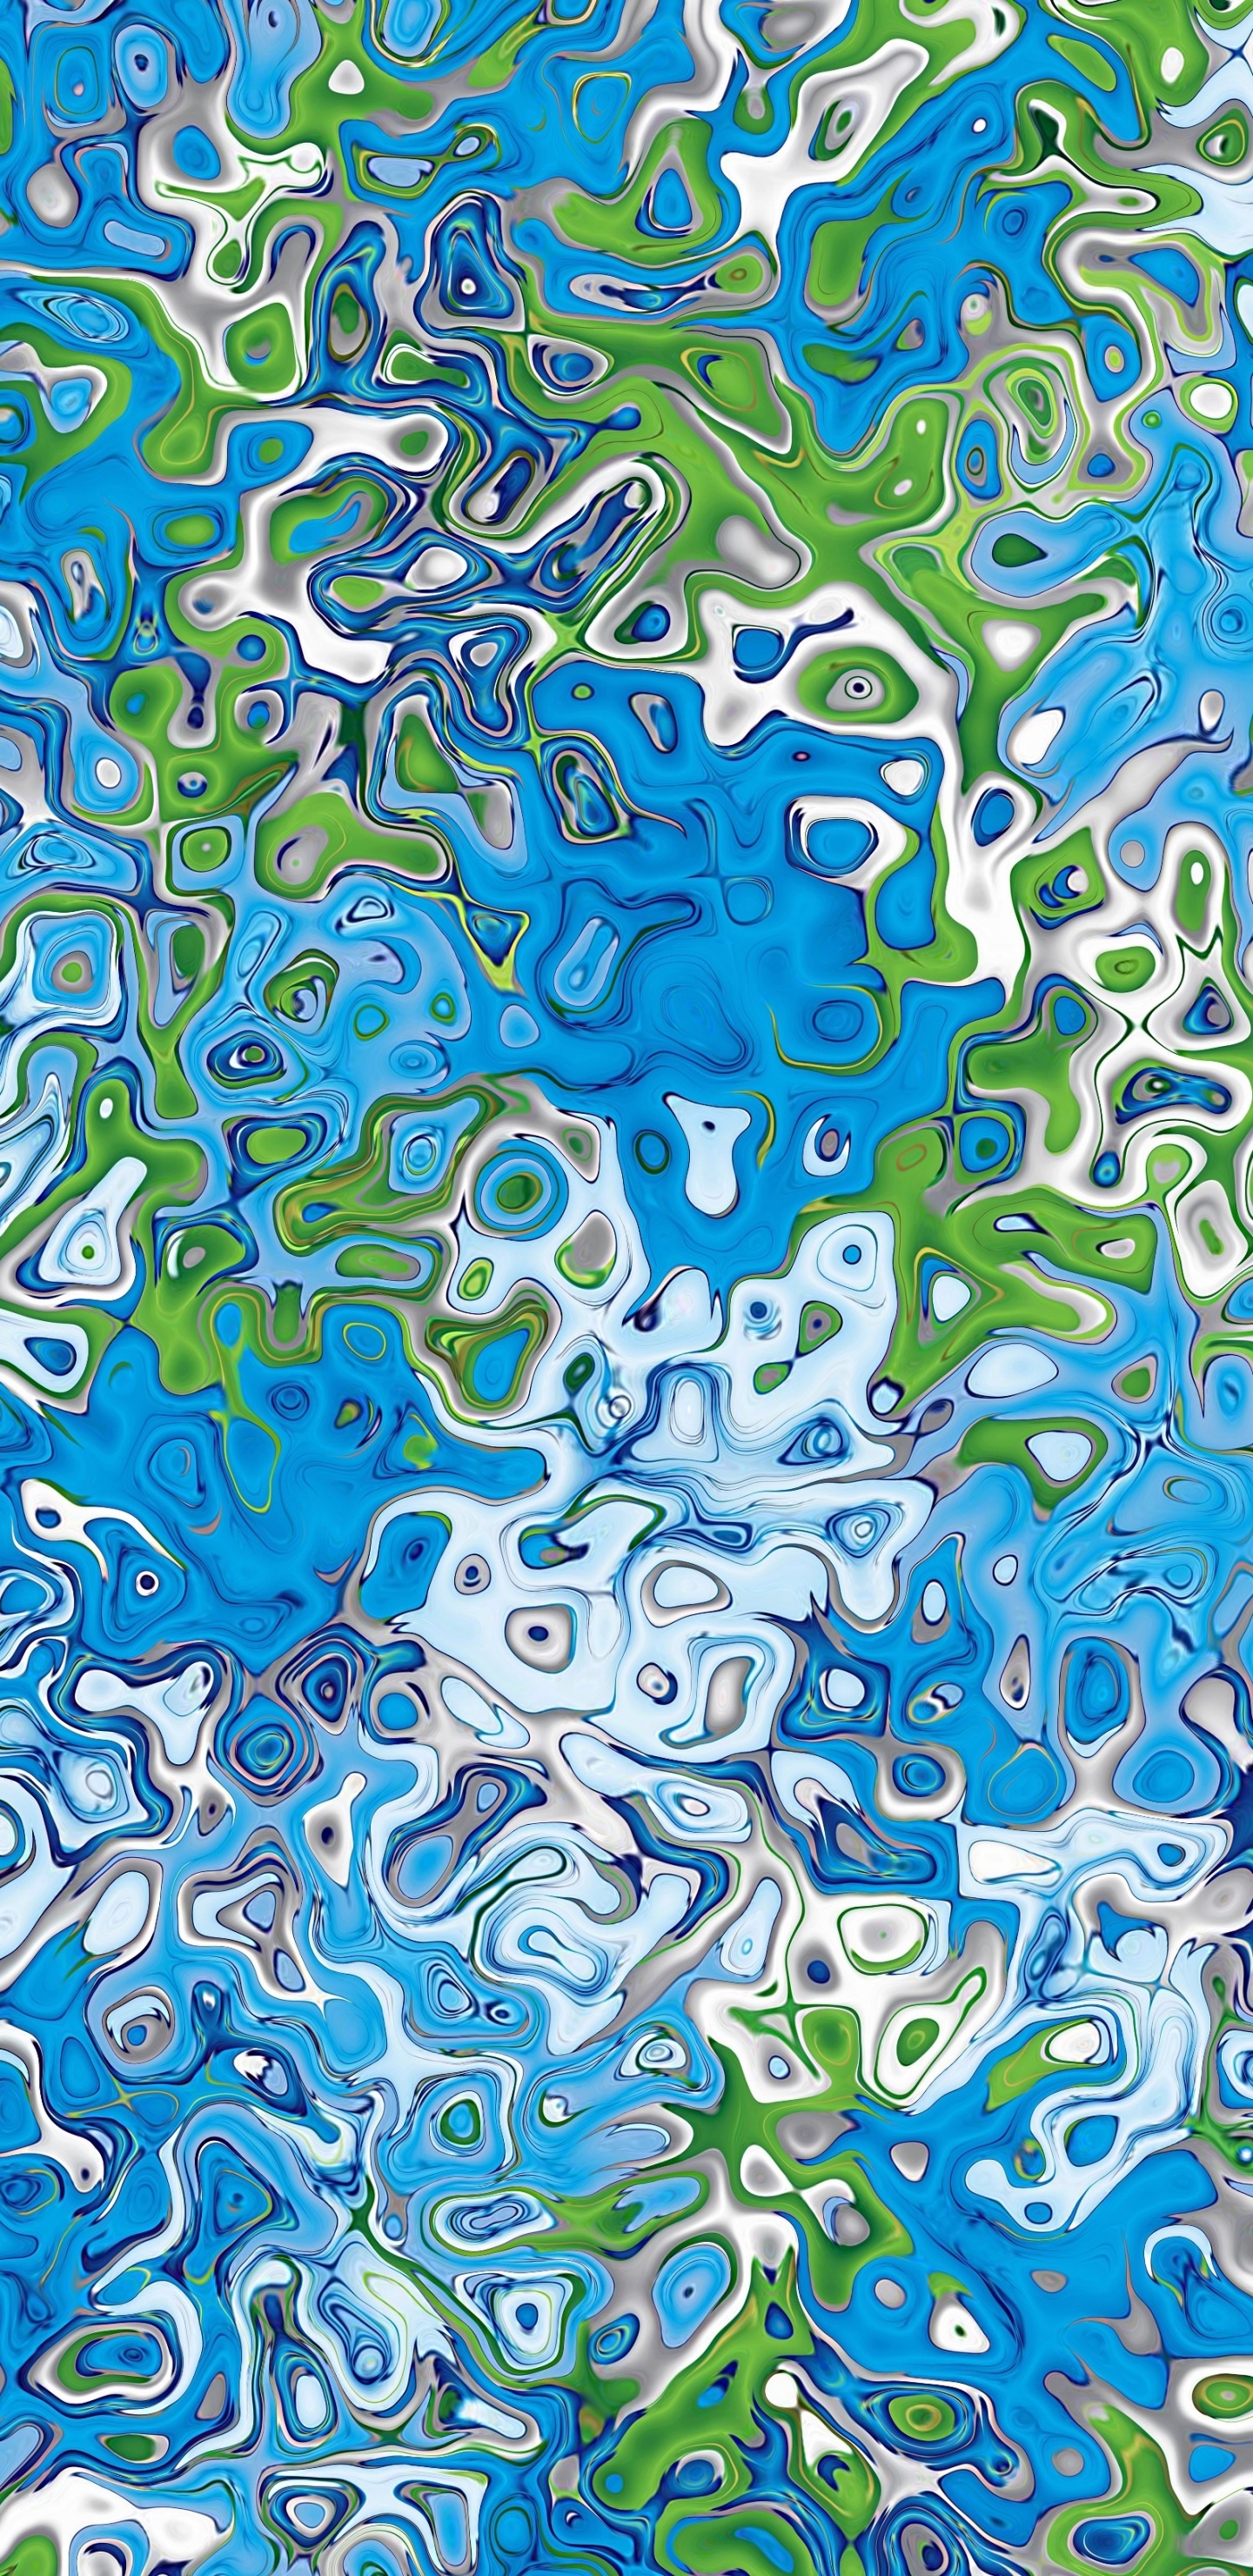 Green Blue and White Abstract Painting. Wallpaper in 1440x2960 Resolution